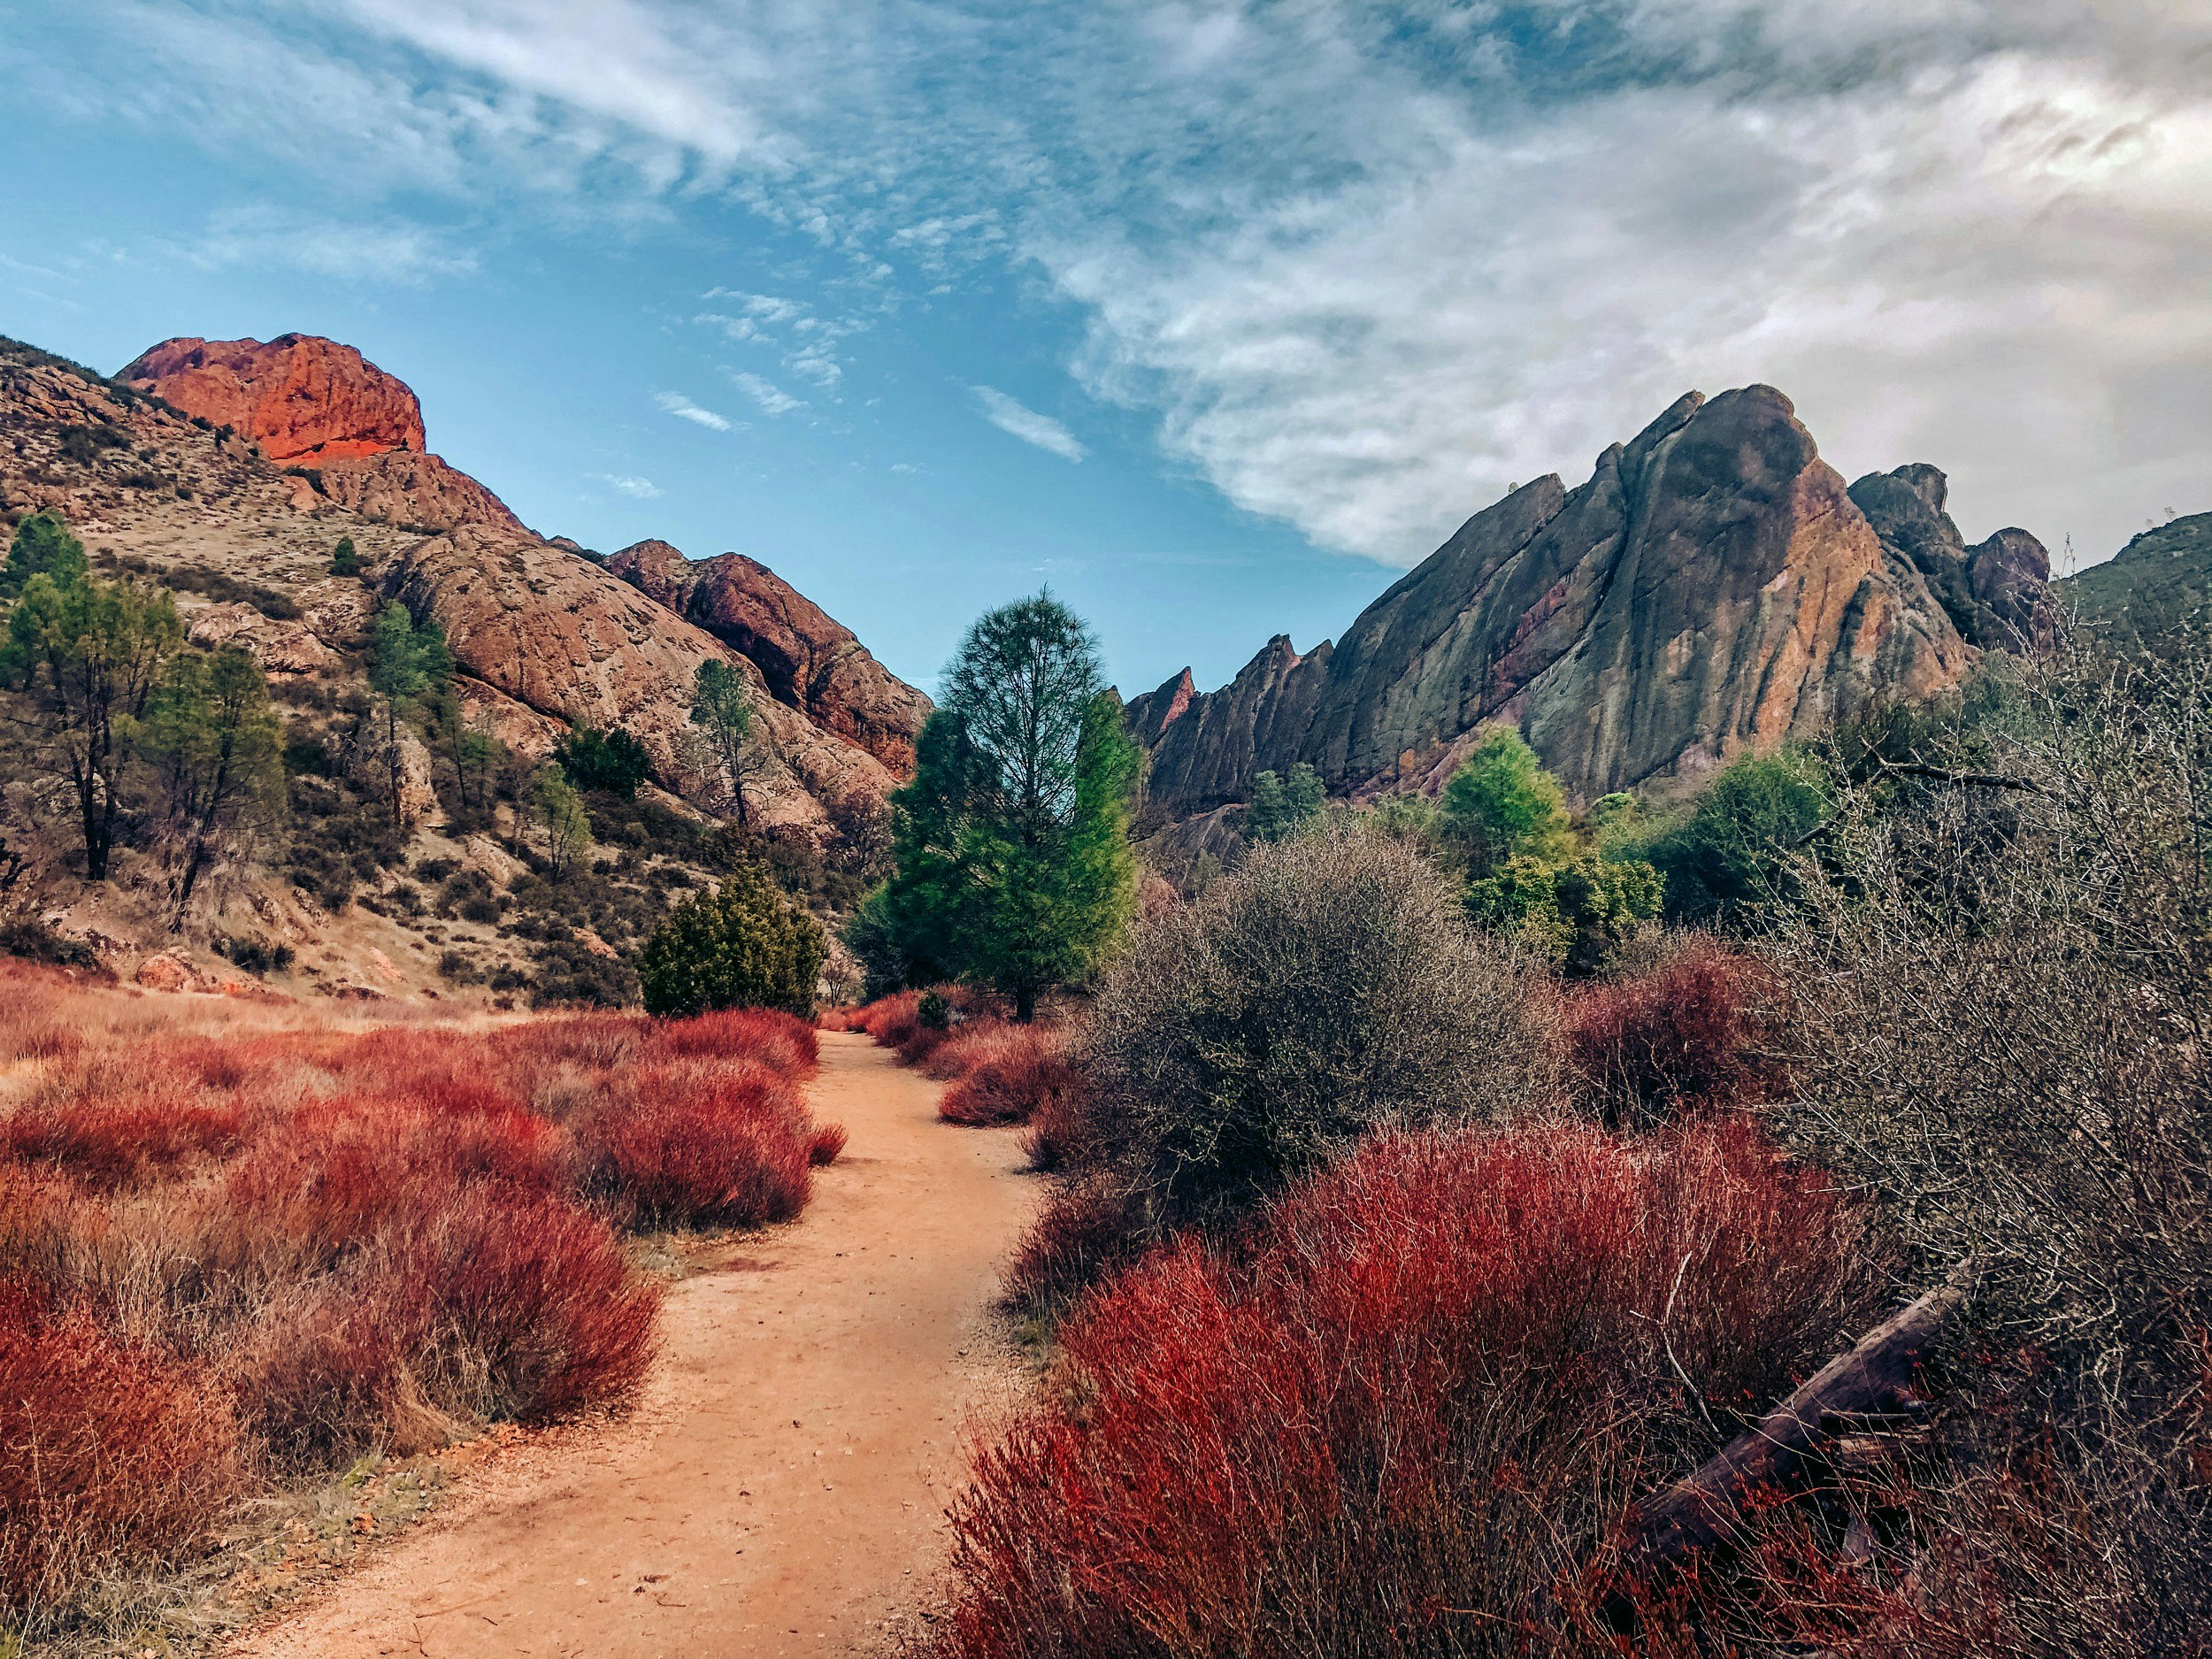 A trail winds between red bushes as a sunset starts to light up the rocks at Pinnacles National Park